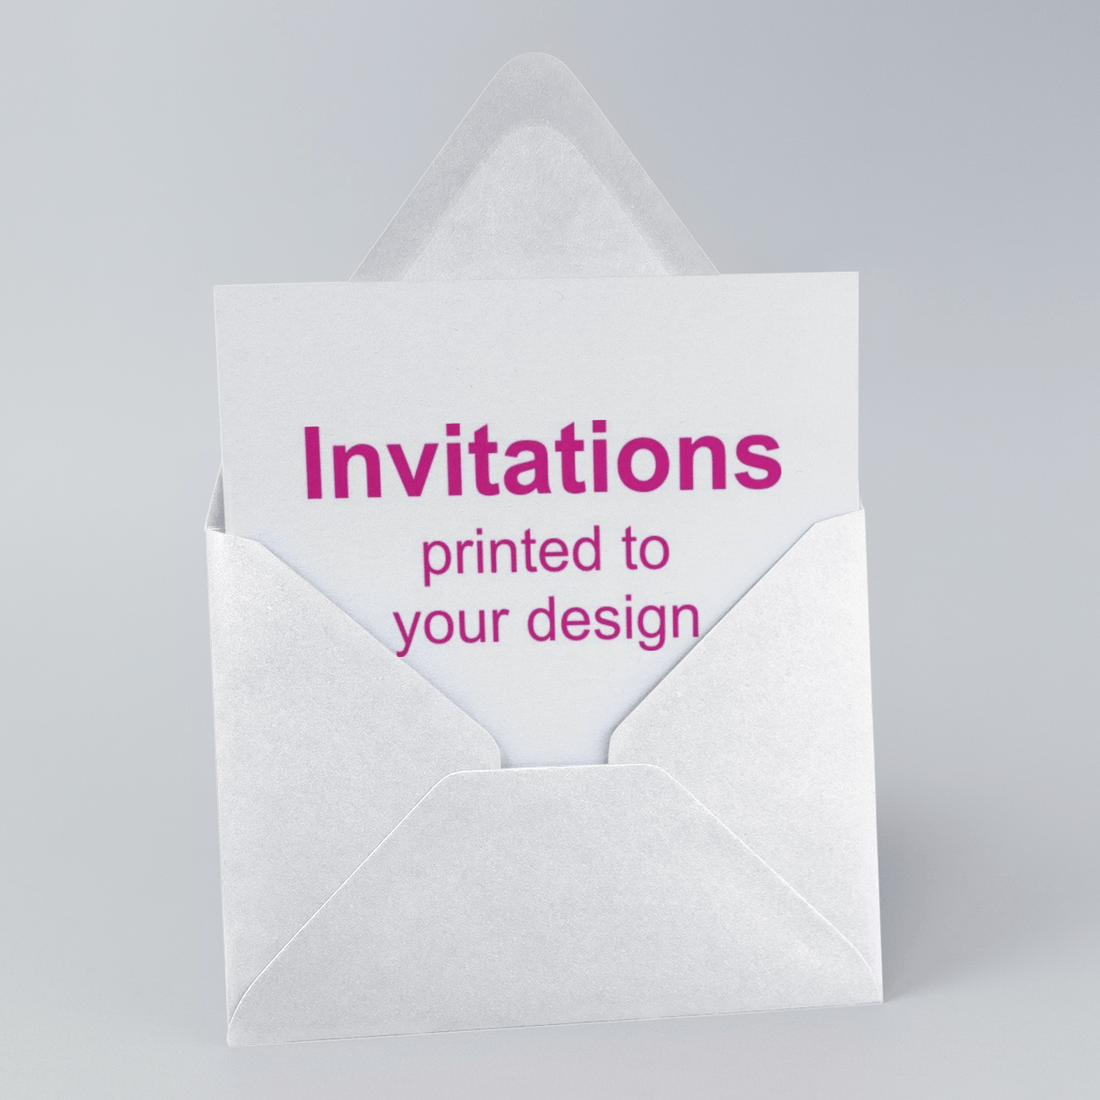 Did You Know We Design & Print Invitations?